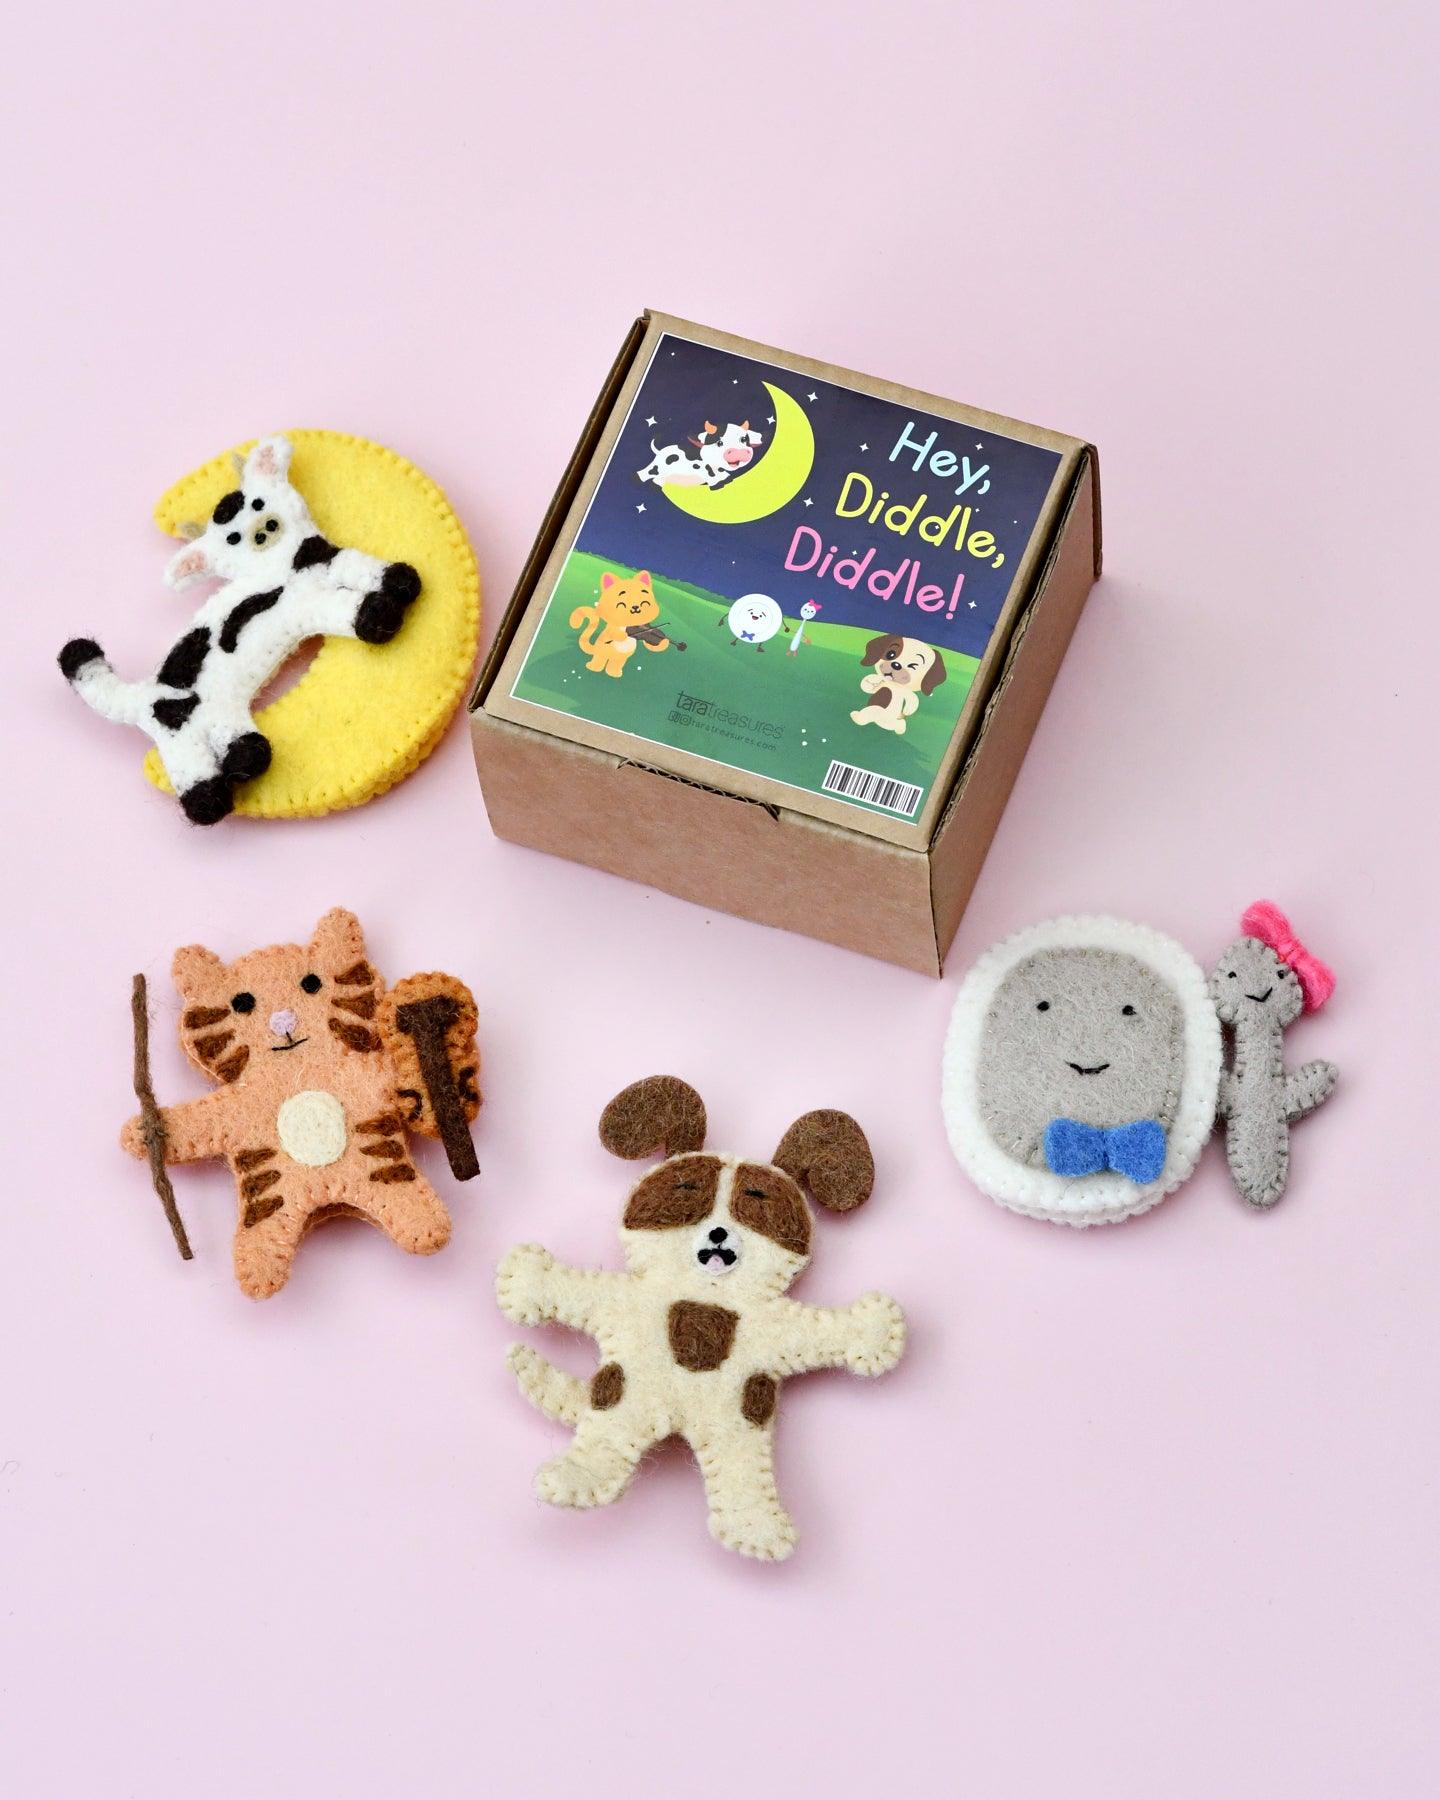 Hey Diddle Diddle Finger Puppet Set